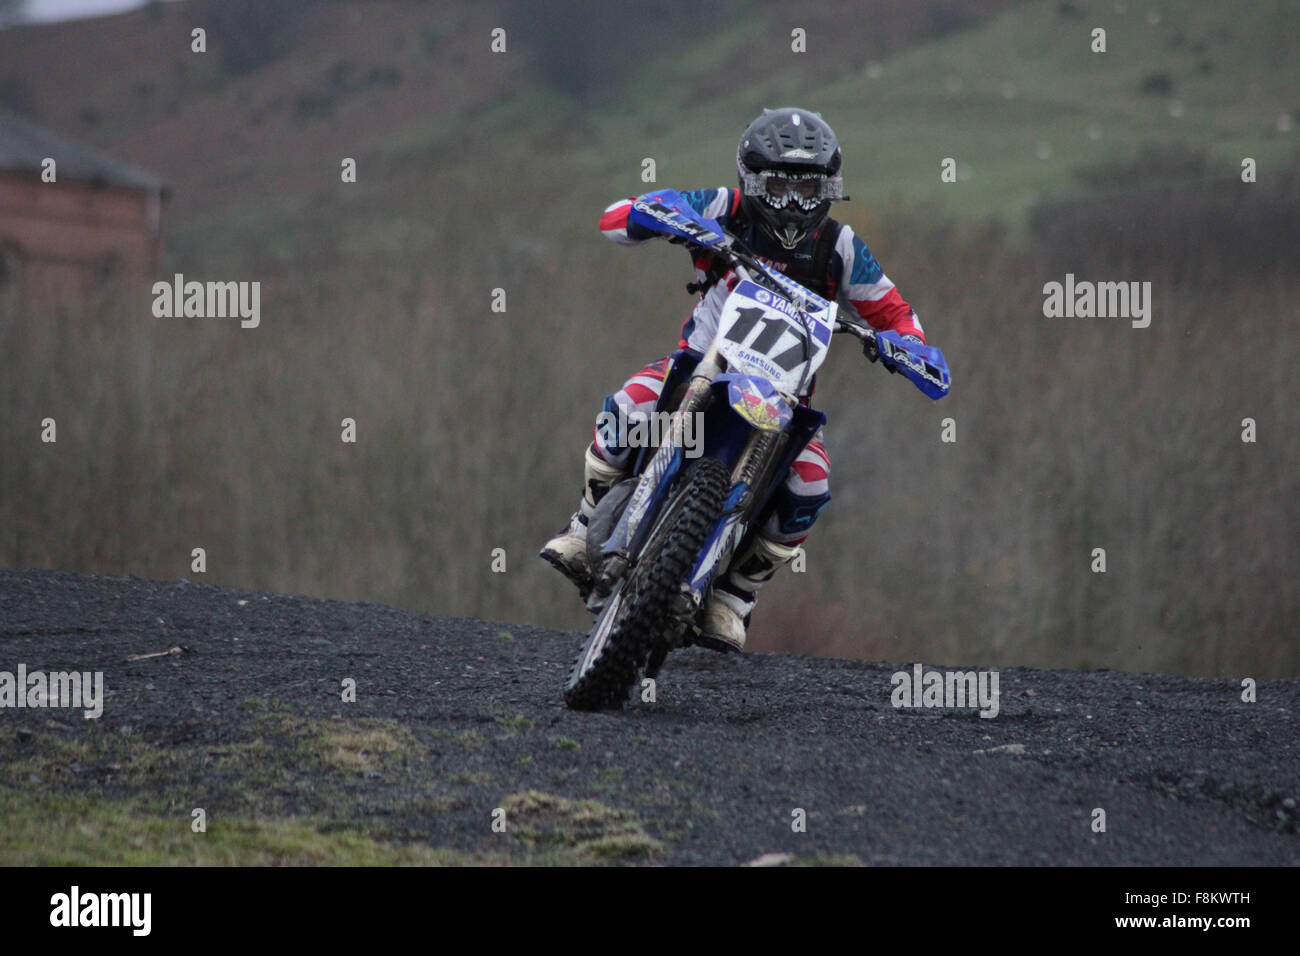 PONTYPOOL, UNITED KINGDOM. 5th December 2015. Motocross rider Lloyd Rees, rides for the first time after Weston Beach Race up Po Stock Photo